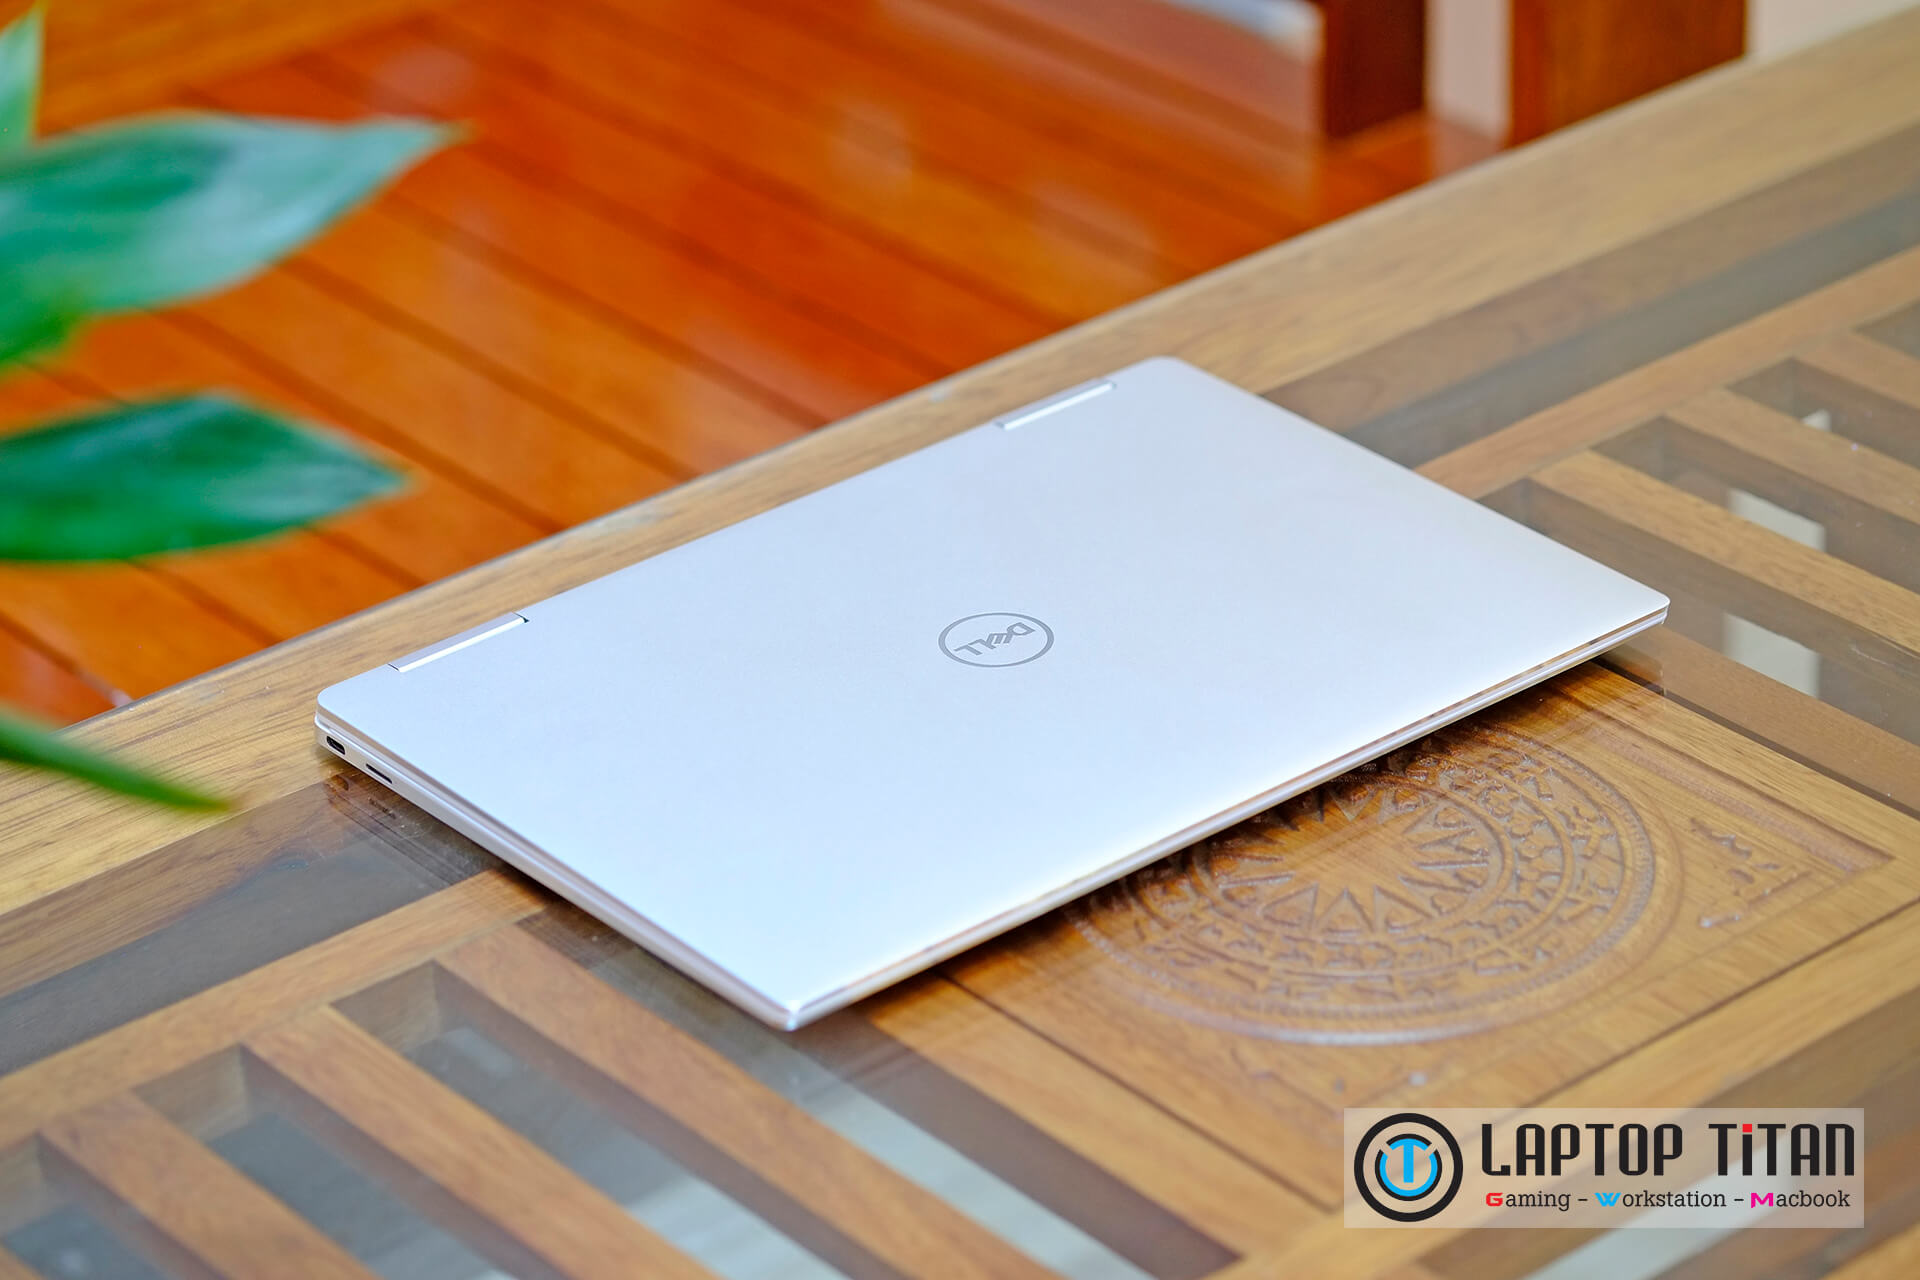 Dell Xps 13 7390 2-In-1 Core I7-1065G7 / 16Gb / 512Gb / Fhd Touch / Likenew 99,99%